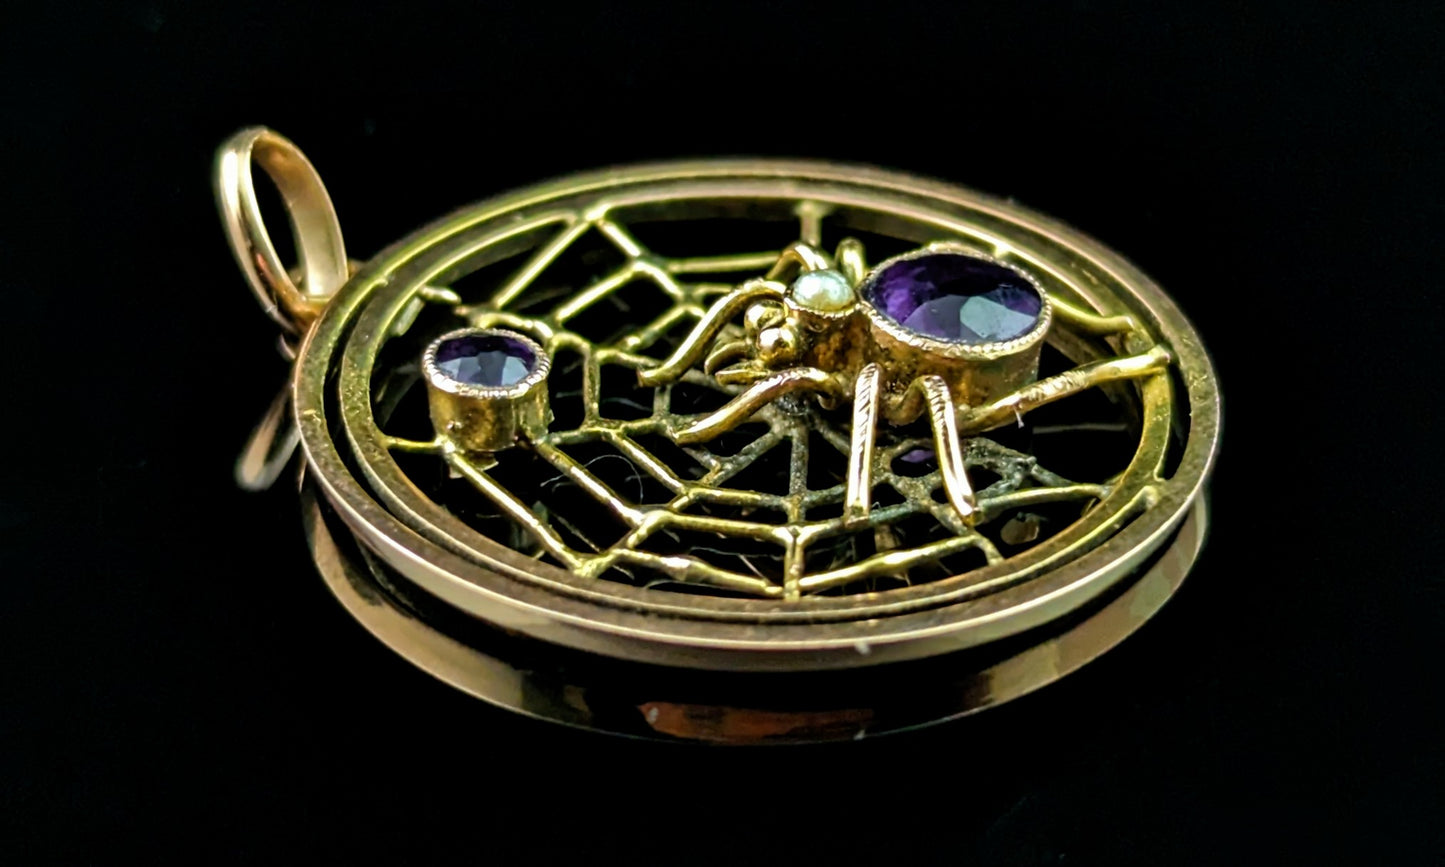 Antique Spider and Web pendant, Amethyst, 9ct gold